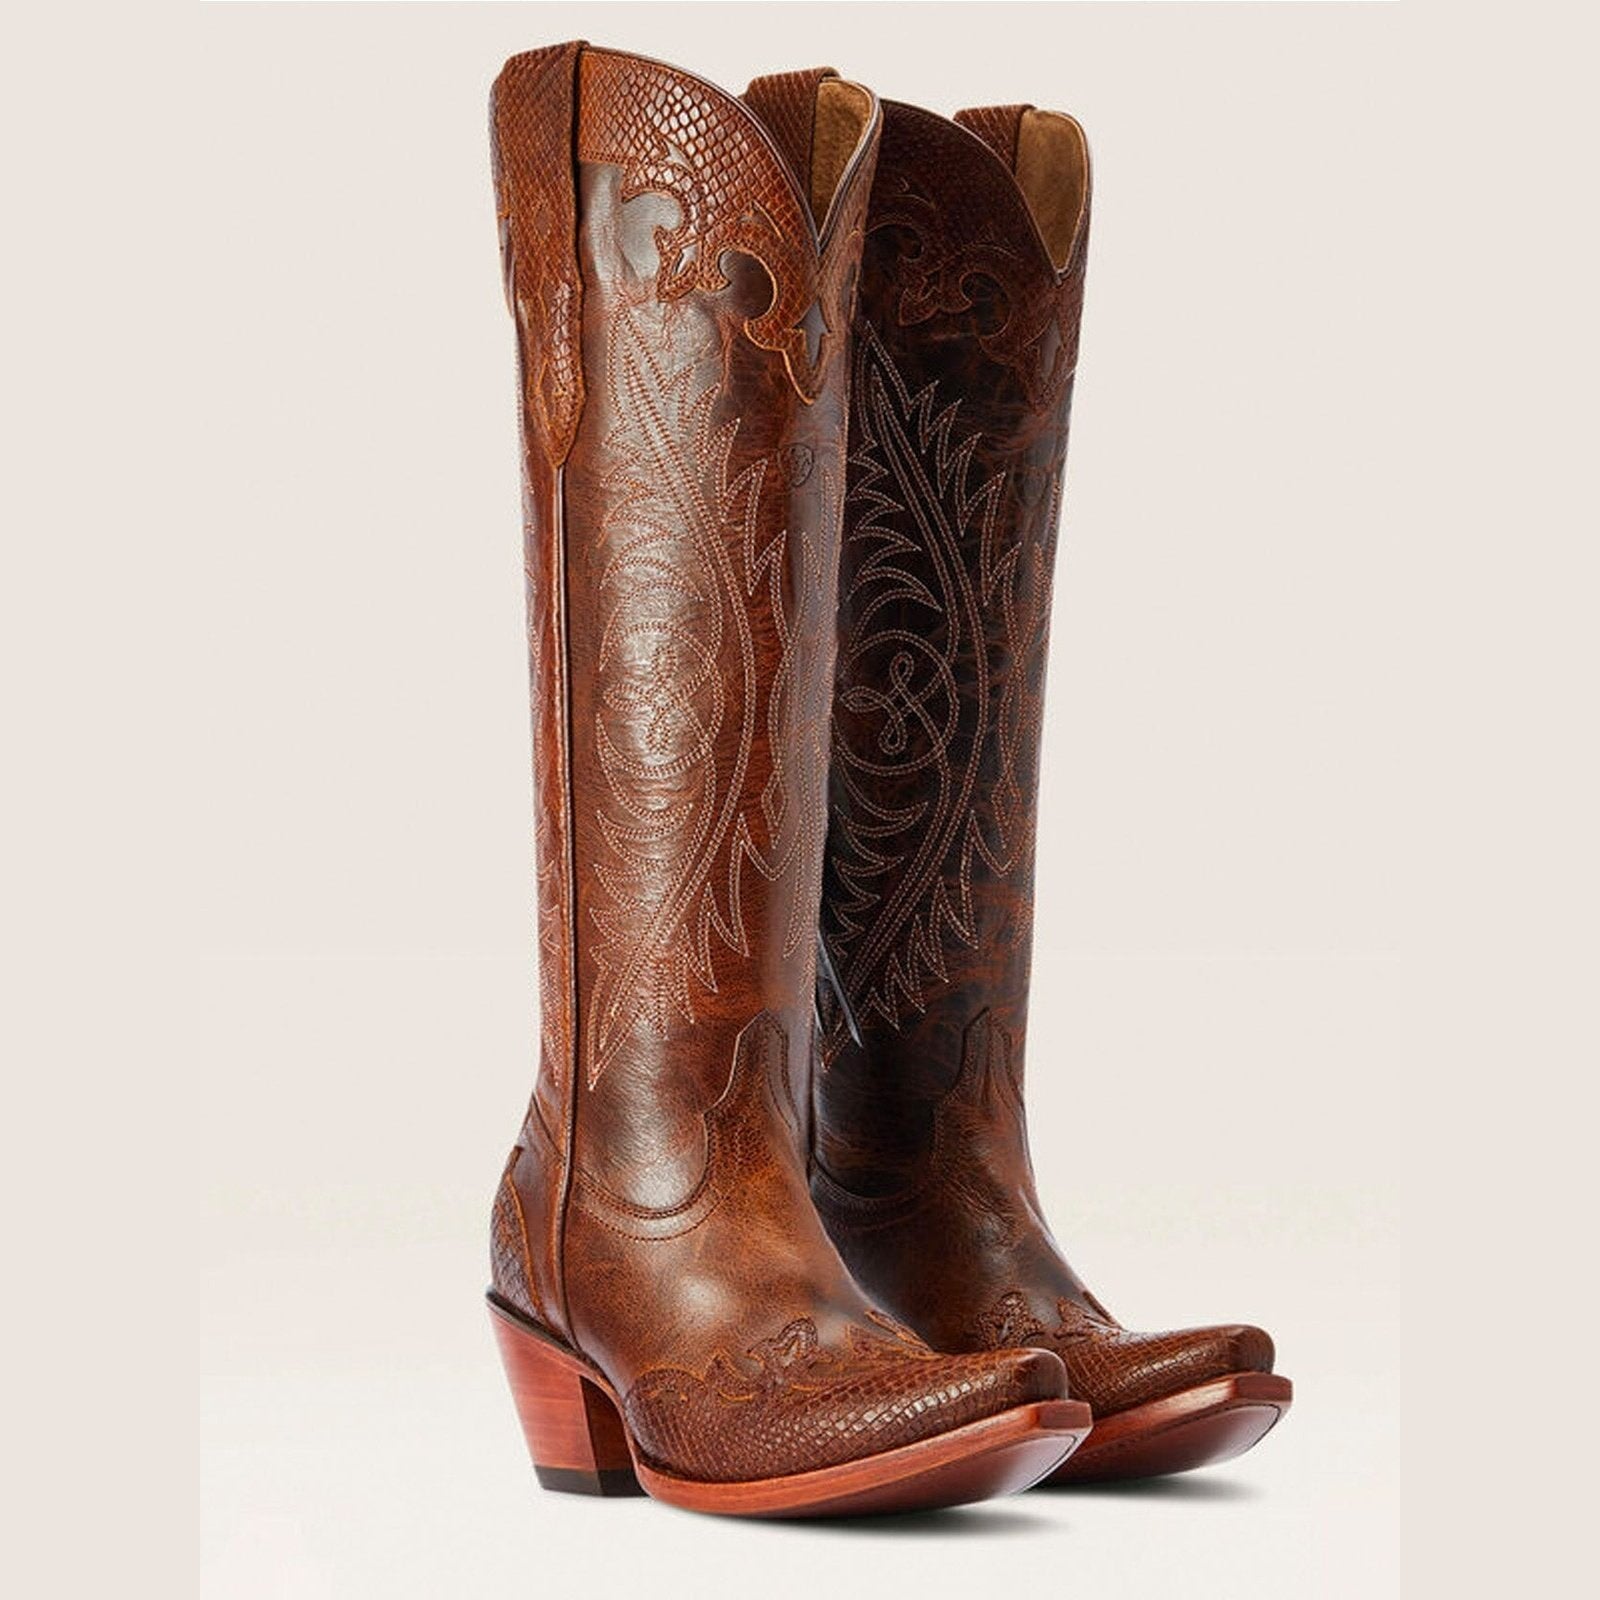 Ariat Women’s Cowgirl Boot 16" Cowhide Stretch Fit X Toe New West Heel 10042483 - Ariat